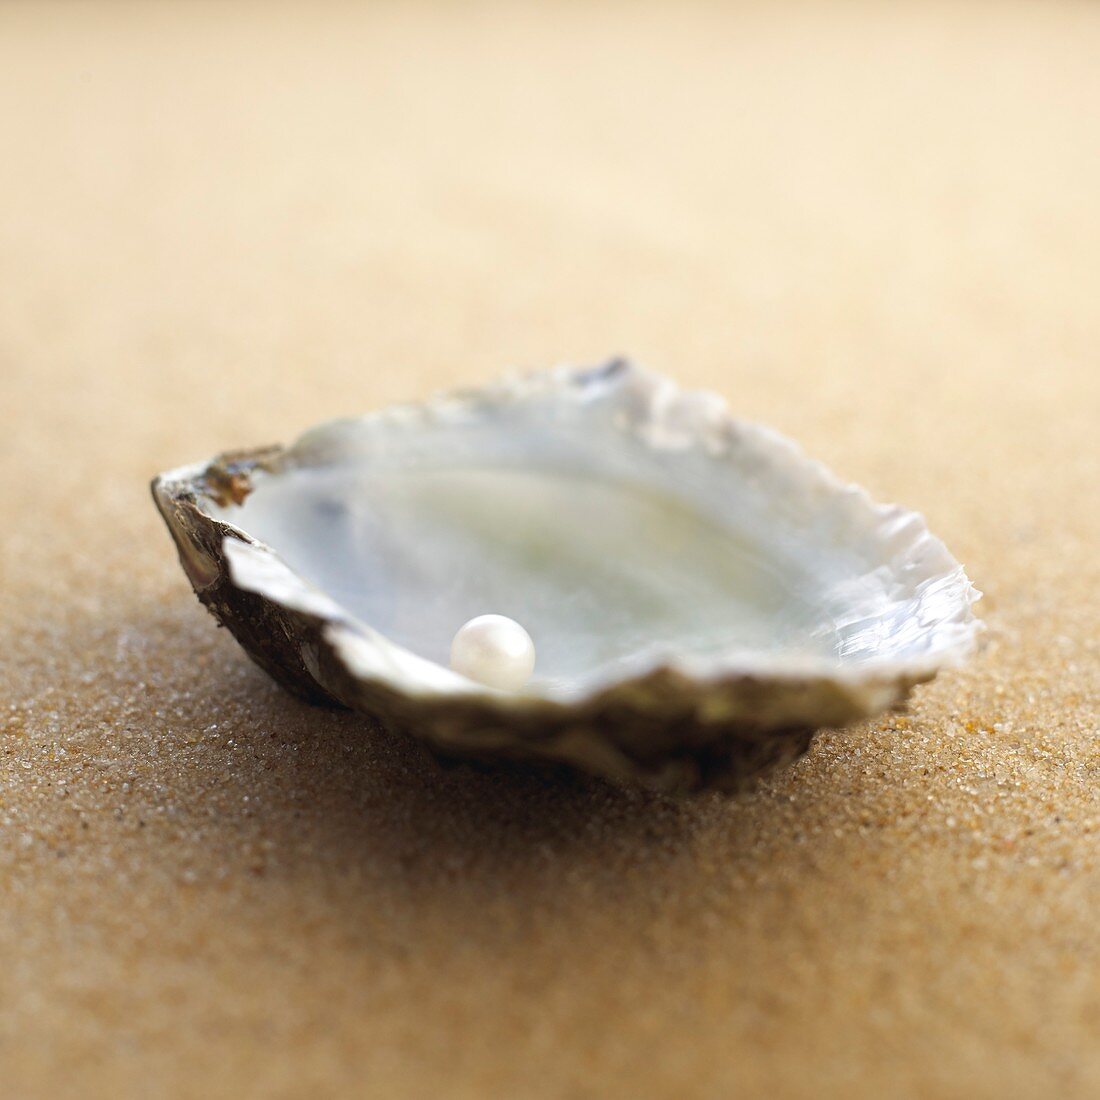 Oyster shell with pearl inside